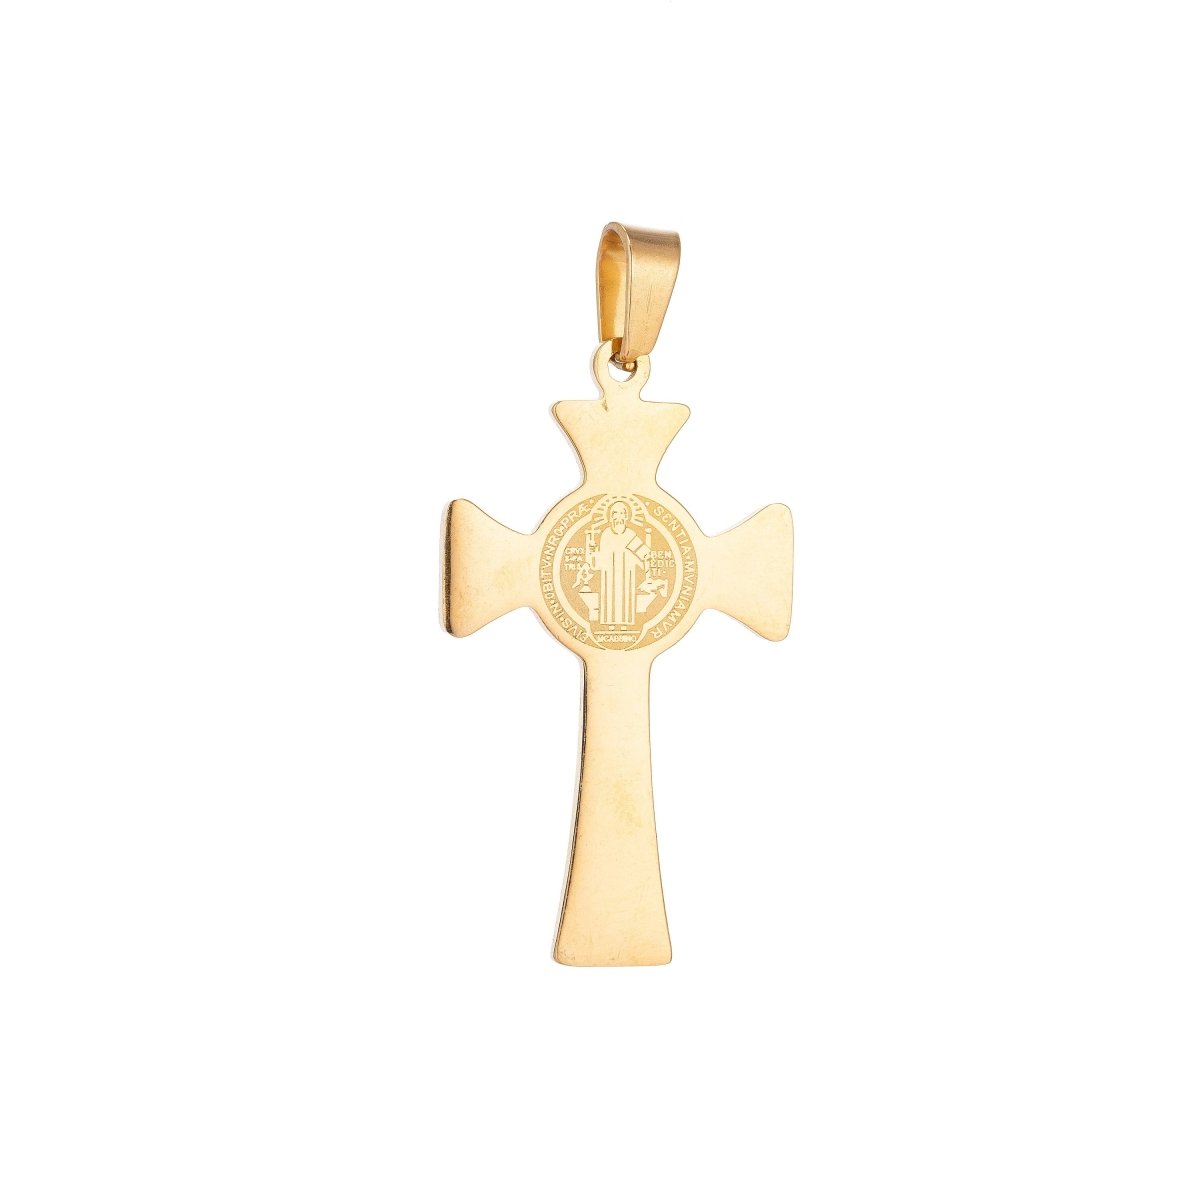 Stainless Steel Cross in Gold filled Italian St Benedict Cross Charm Rosary Cross Rosary Supplies 41x20mm Religious Jewelry J-389 - DLUXCA